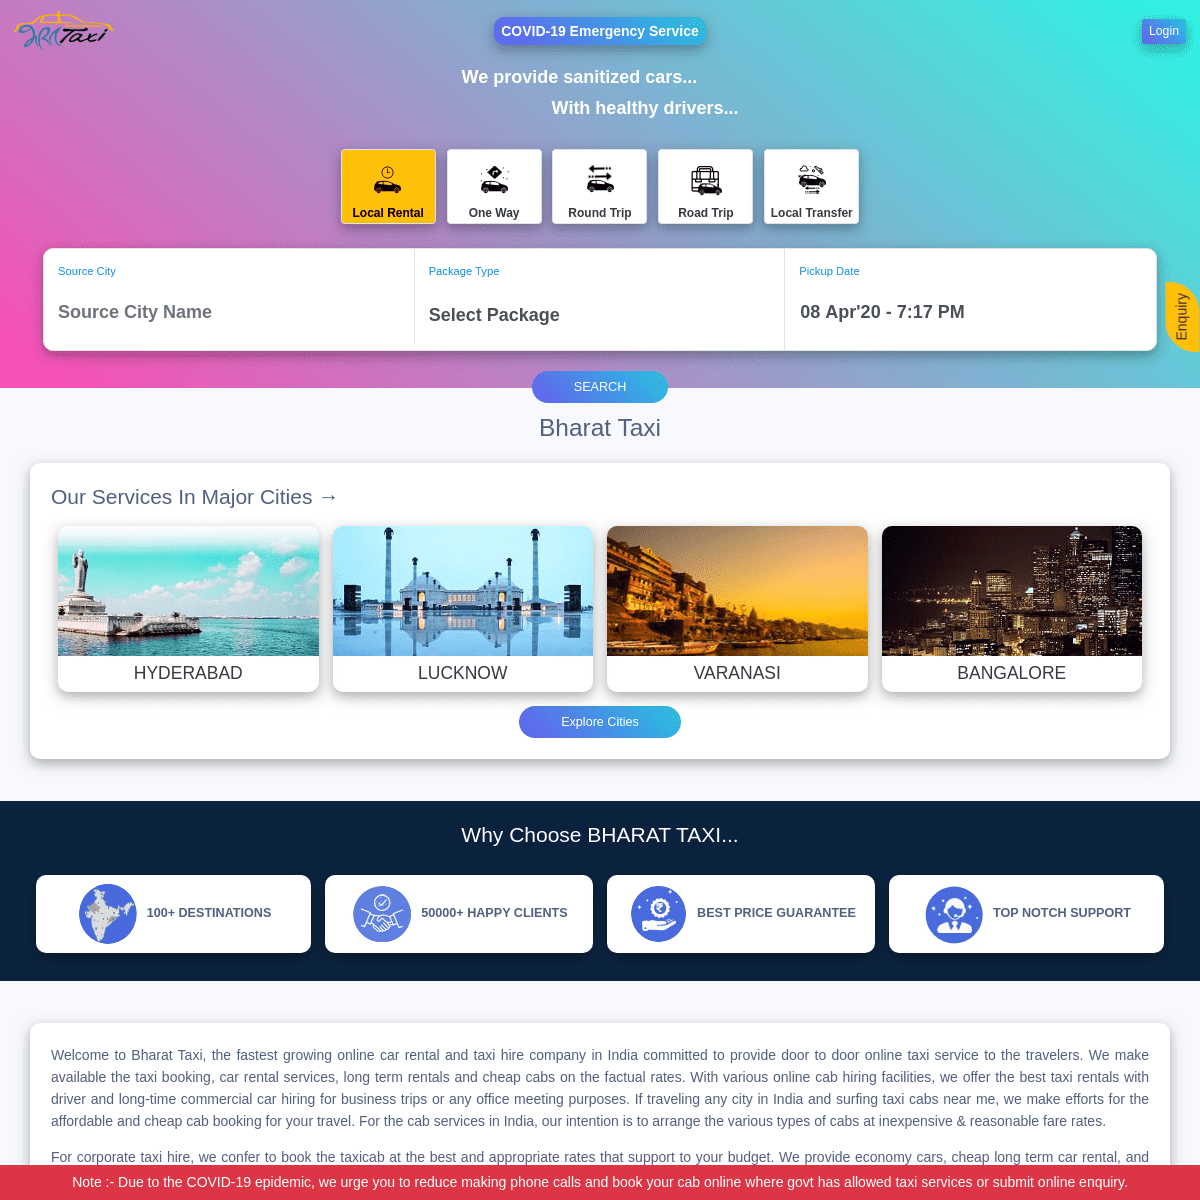 A complete backup of bharattaxi.com